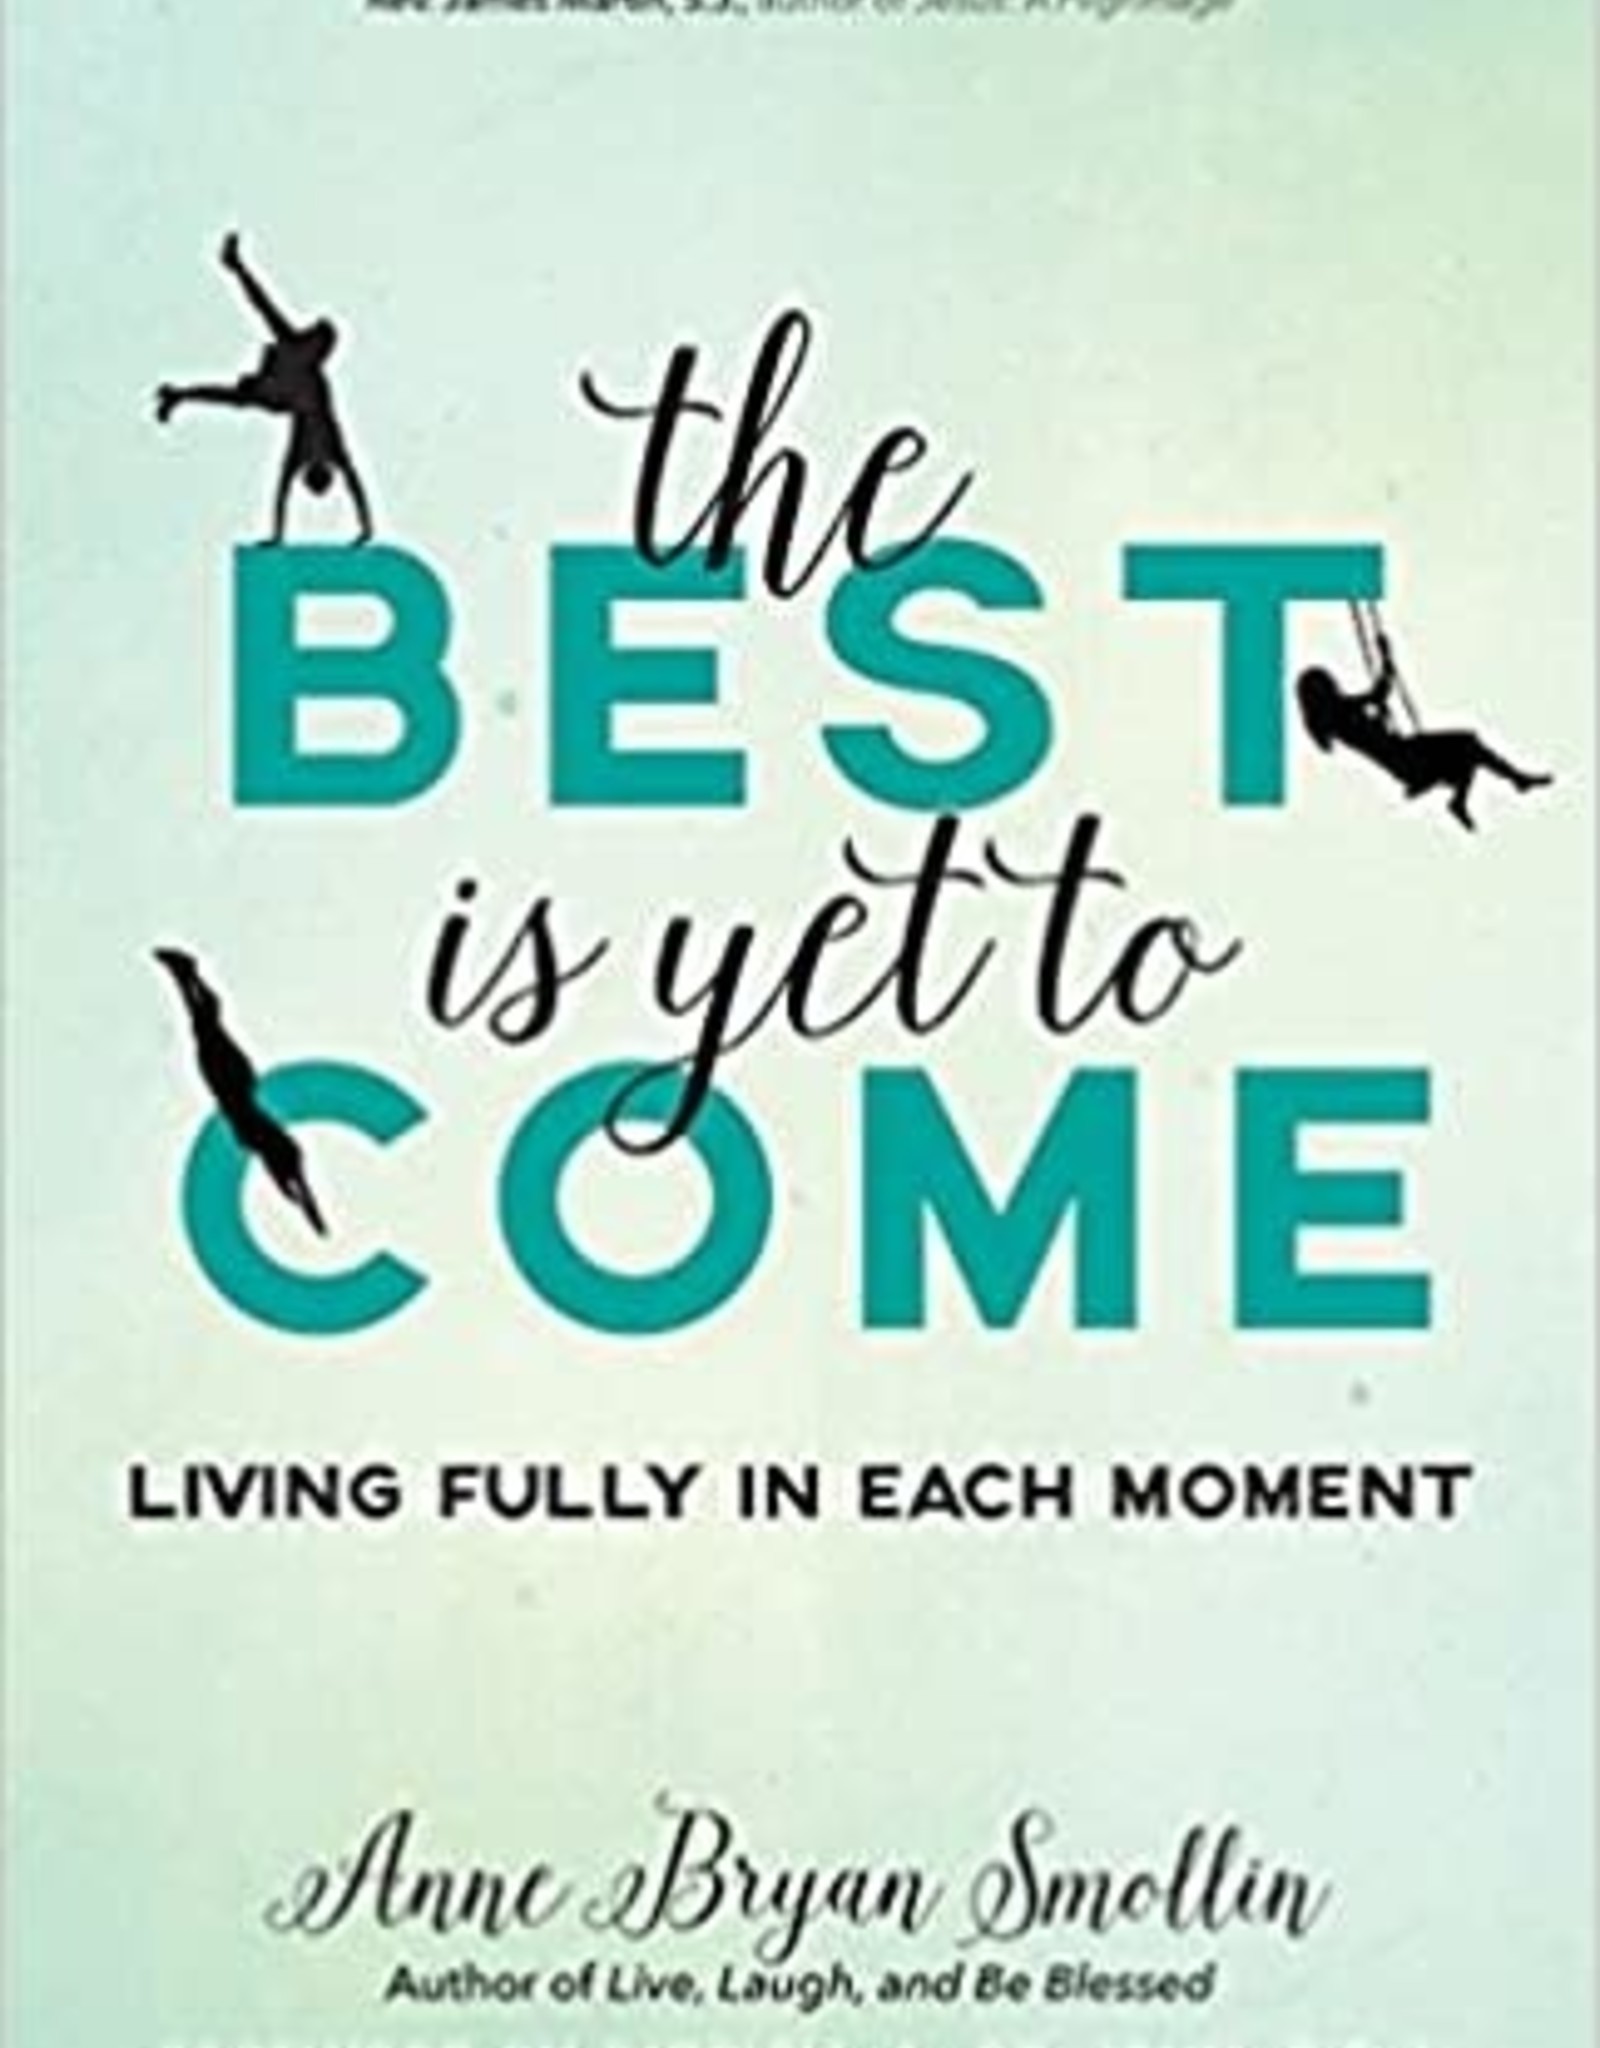 The Best is Yet to Come: Living Fully in Each Moment